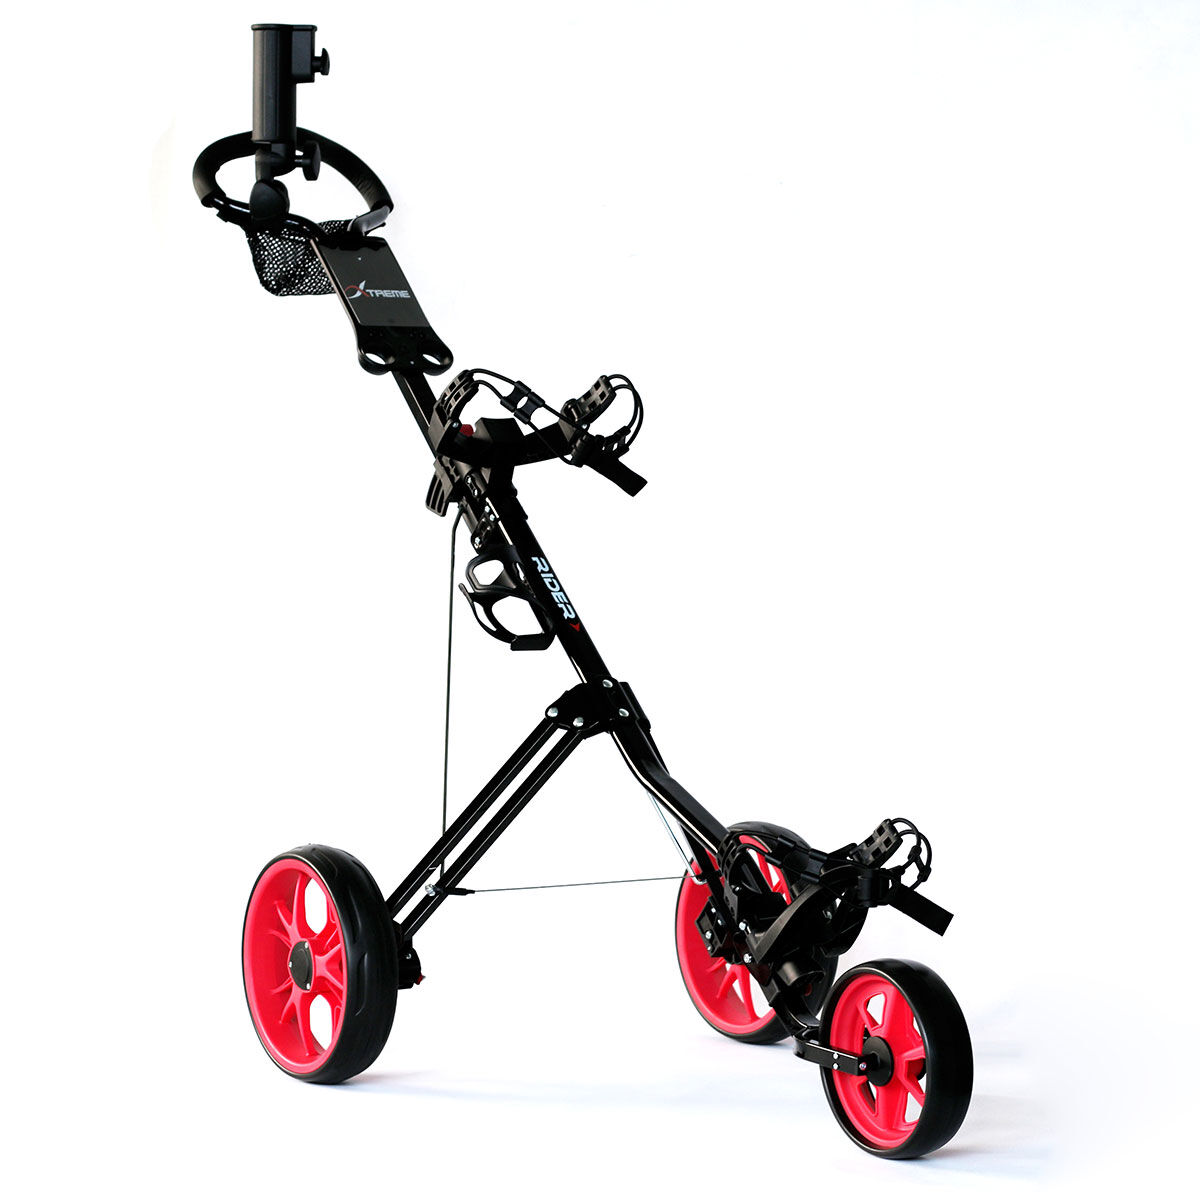 Xtreme Black and Red Adjustable Rider Push Golf Trolley, Size: One Size  | American Golf von Xtreme